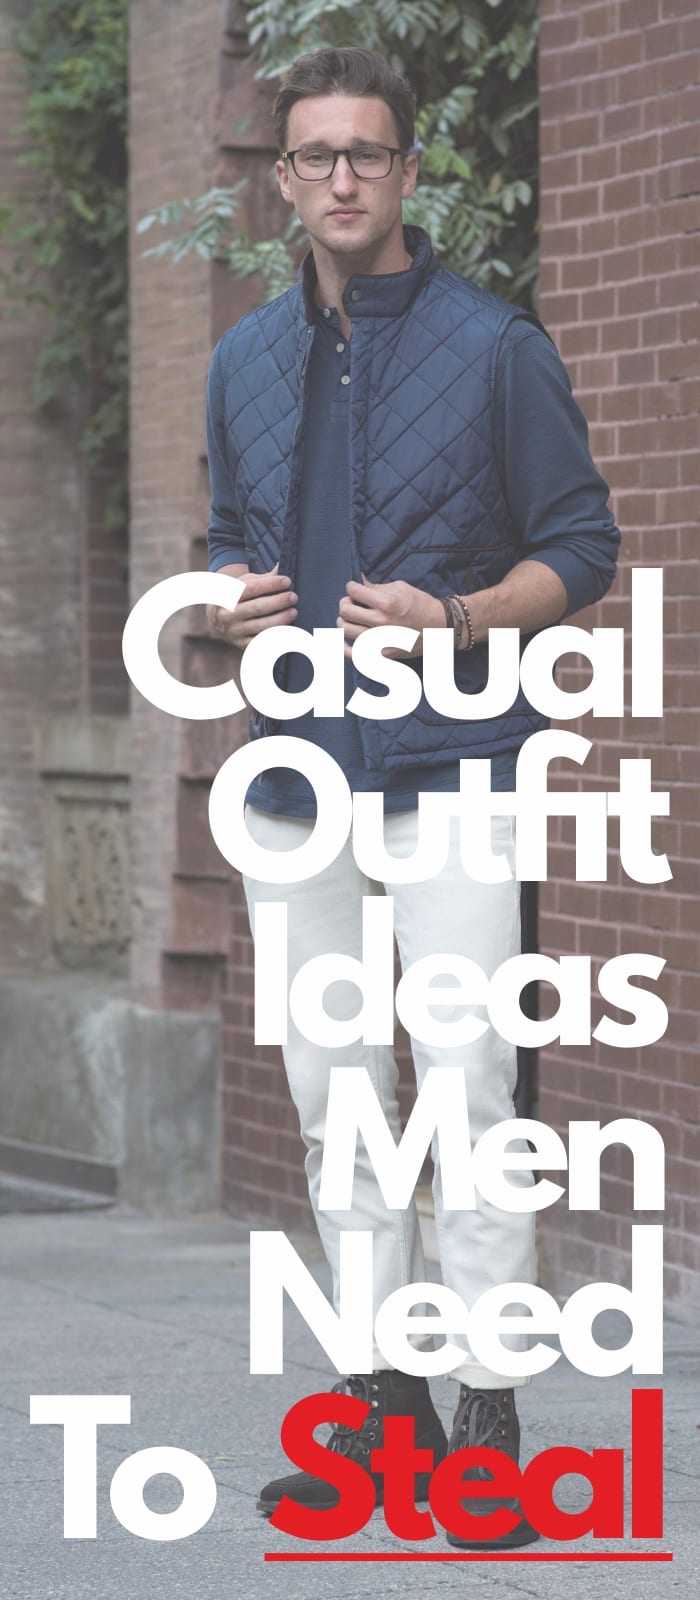 Casual Outfit Ideas Men Need To Steal